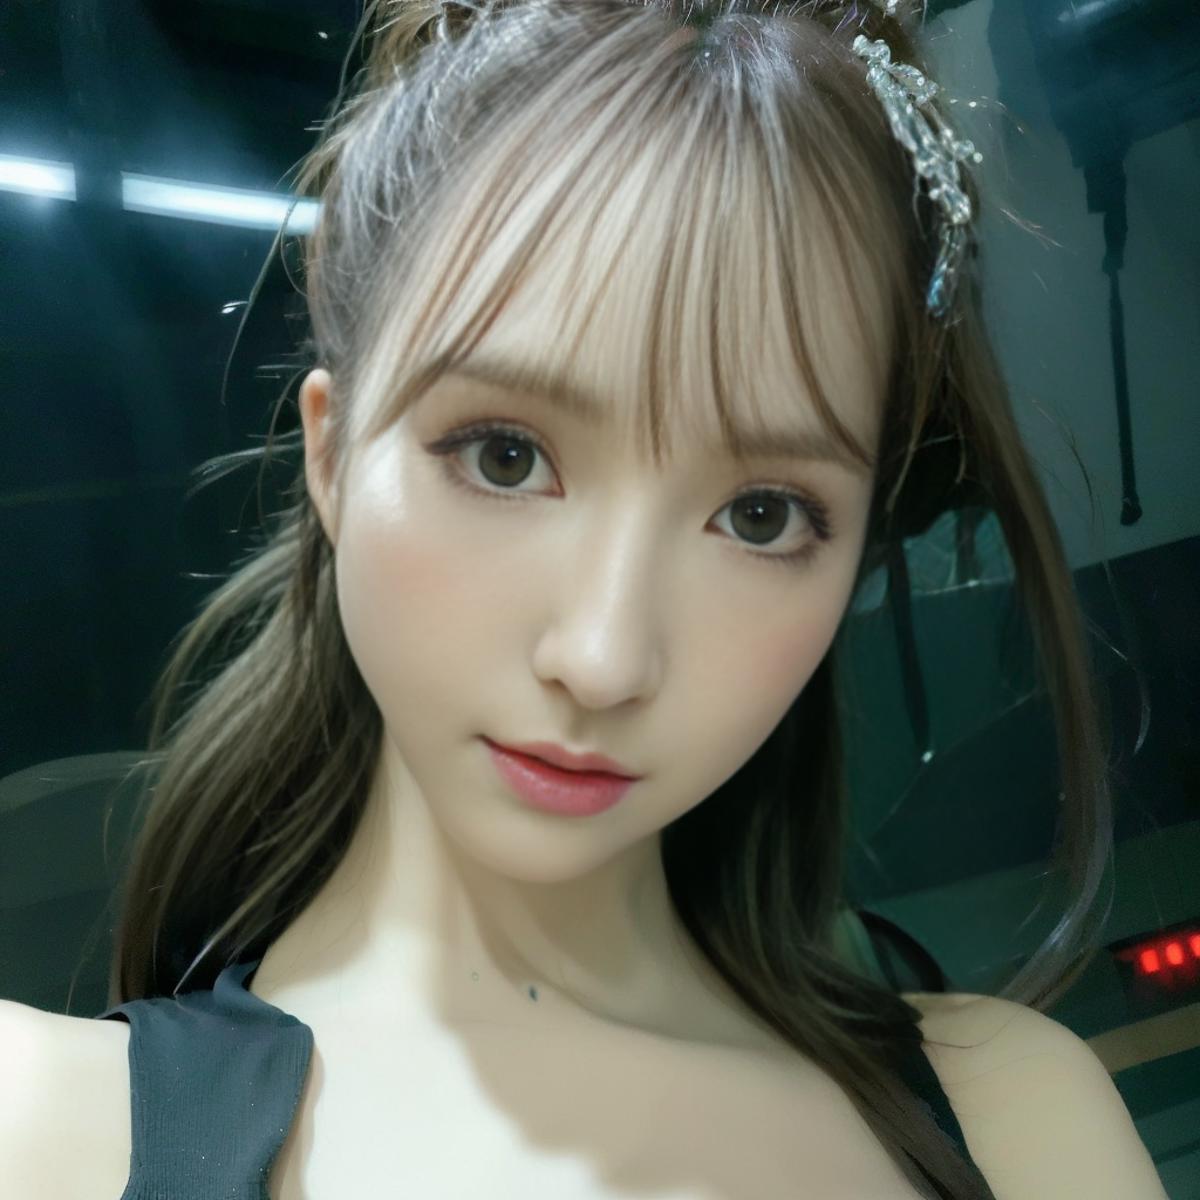 AI model image by chenkaifeng